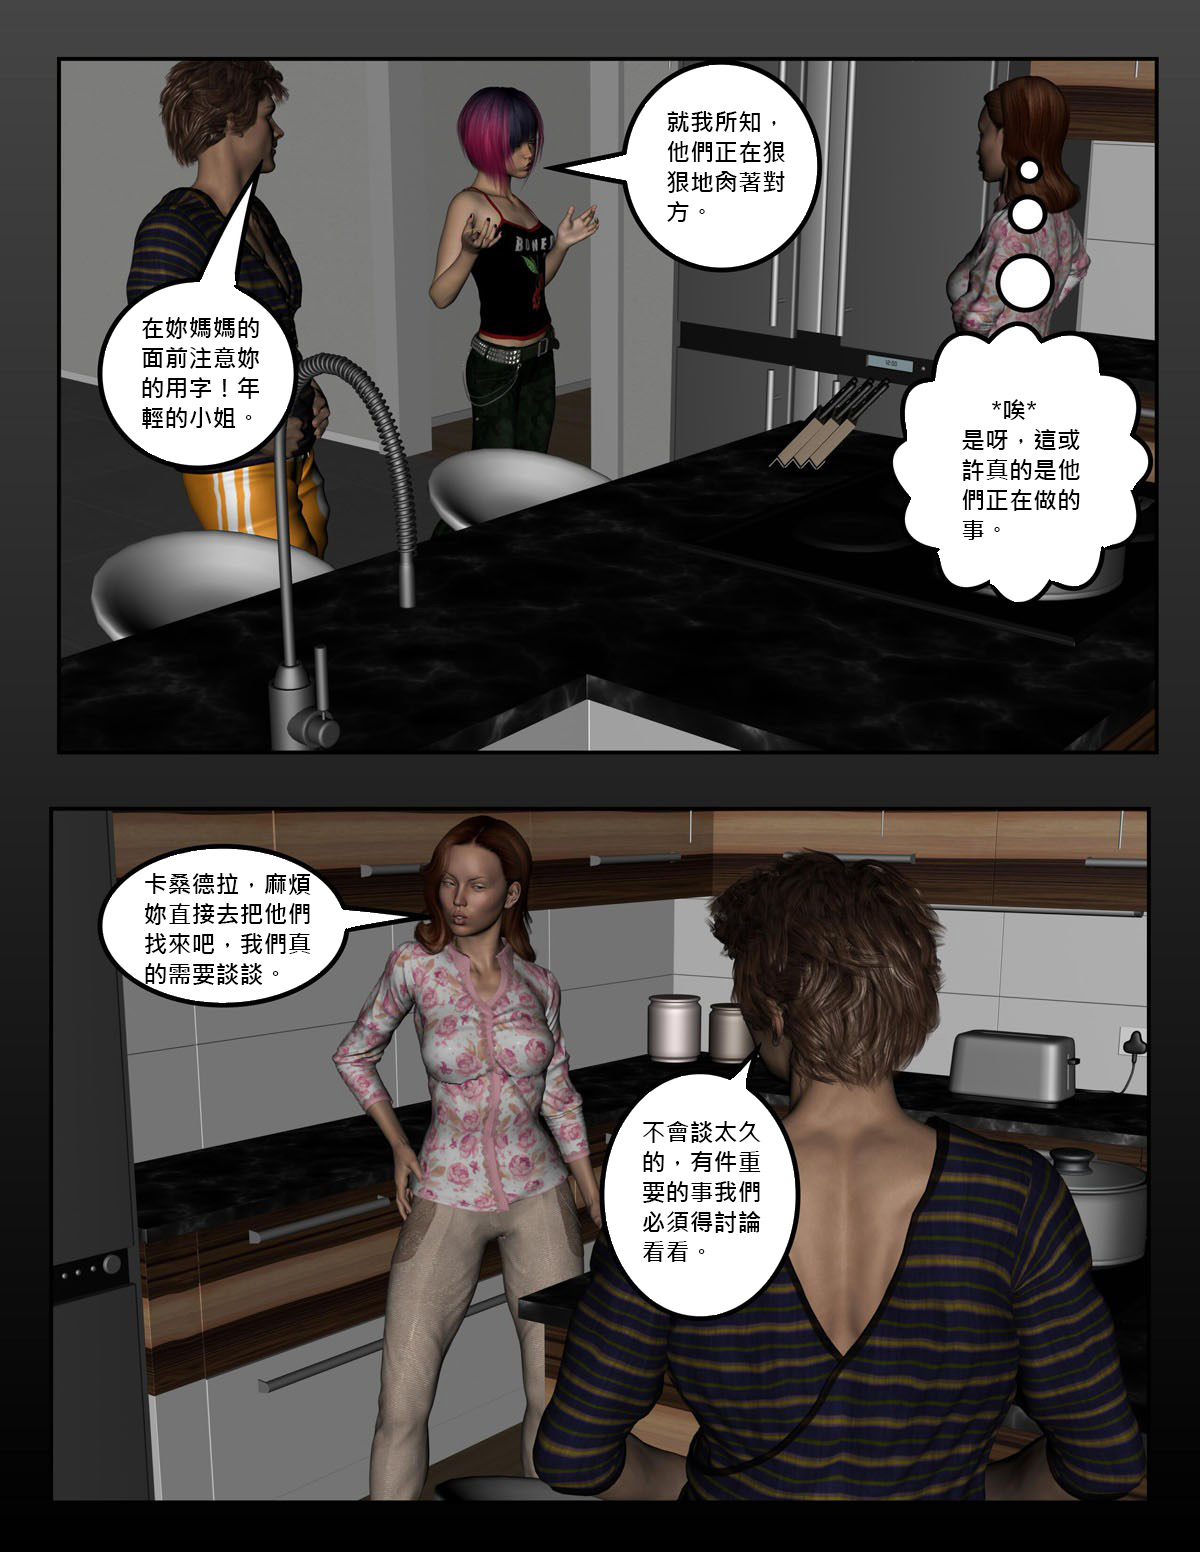 [Dio] The-O-Henry-Factor page 7 full